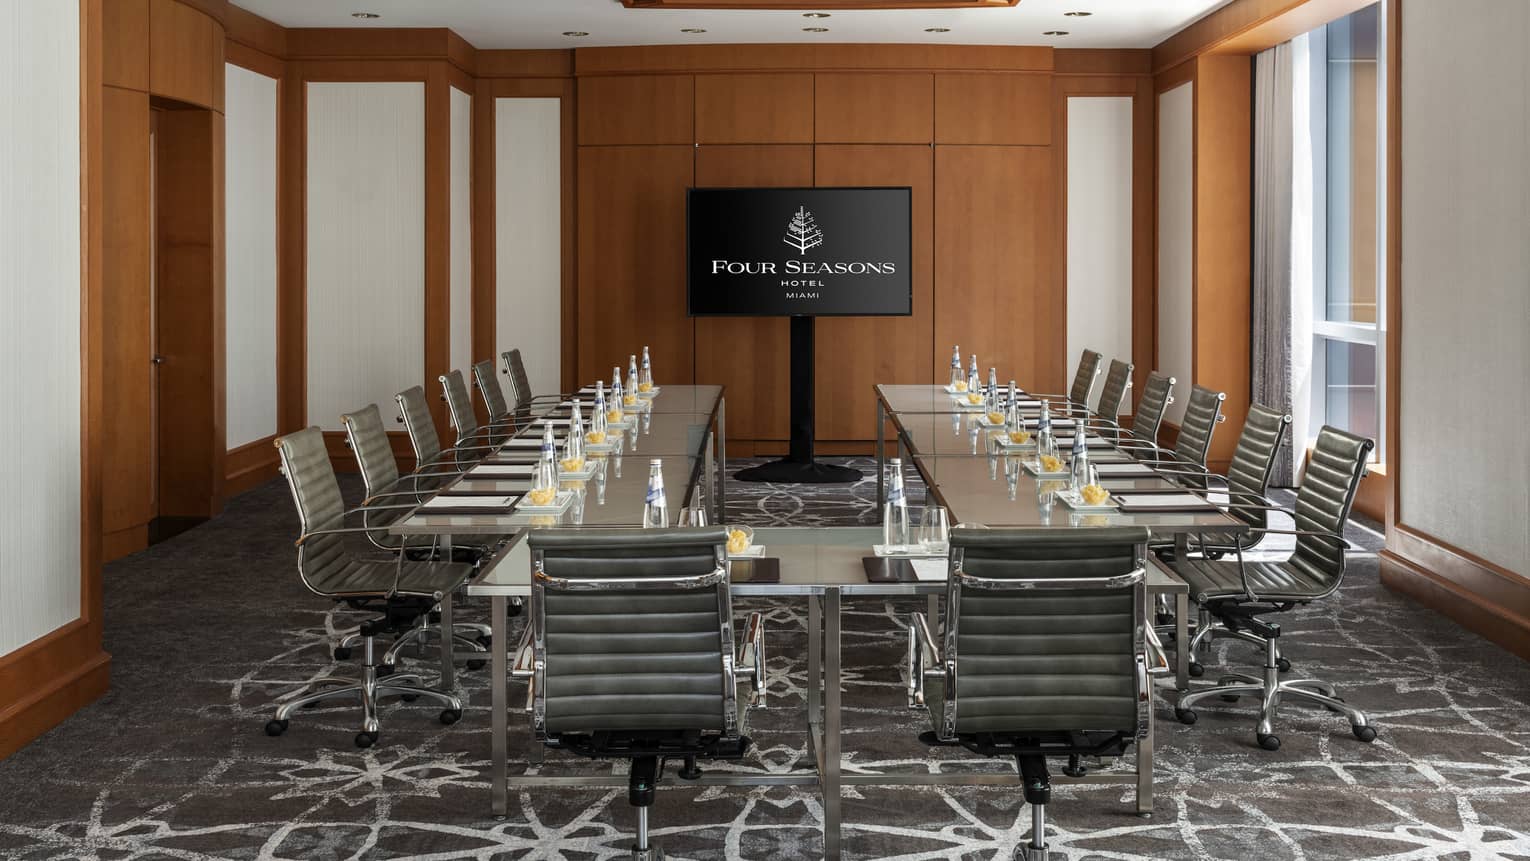 A view of the Key Biscayne Meeting Room 